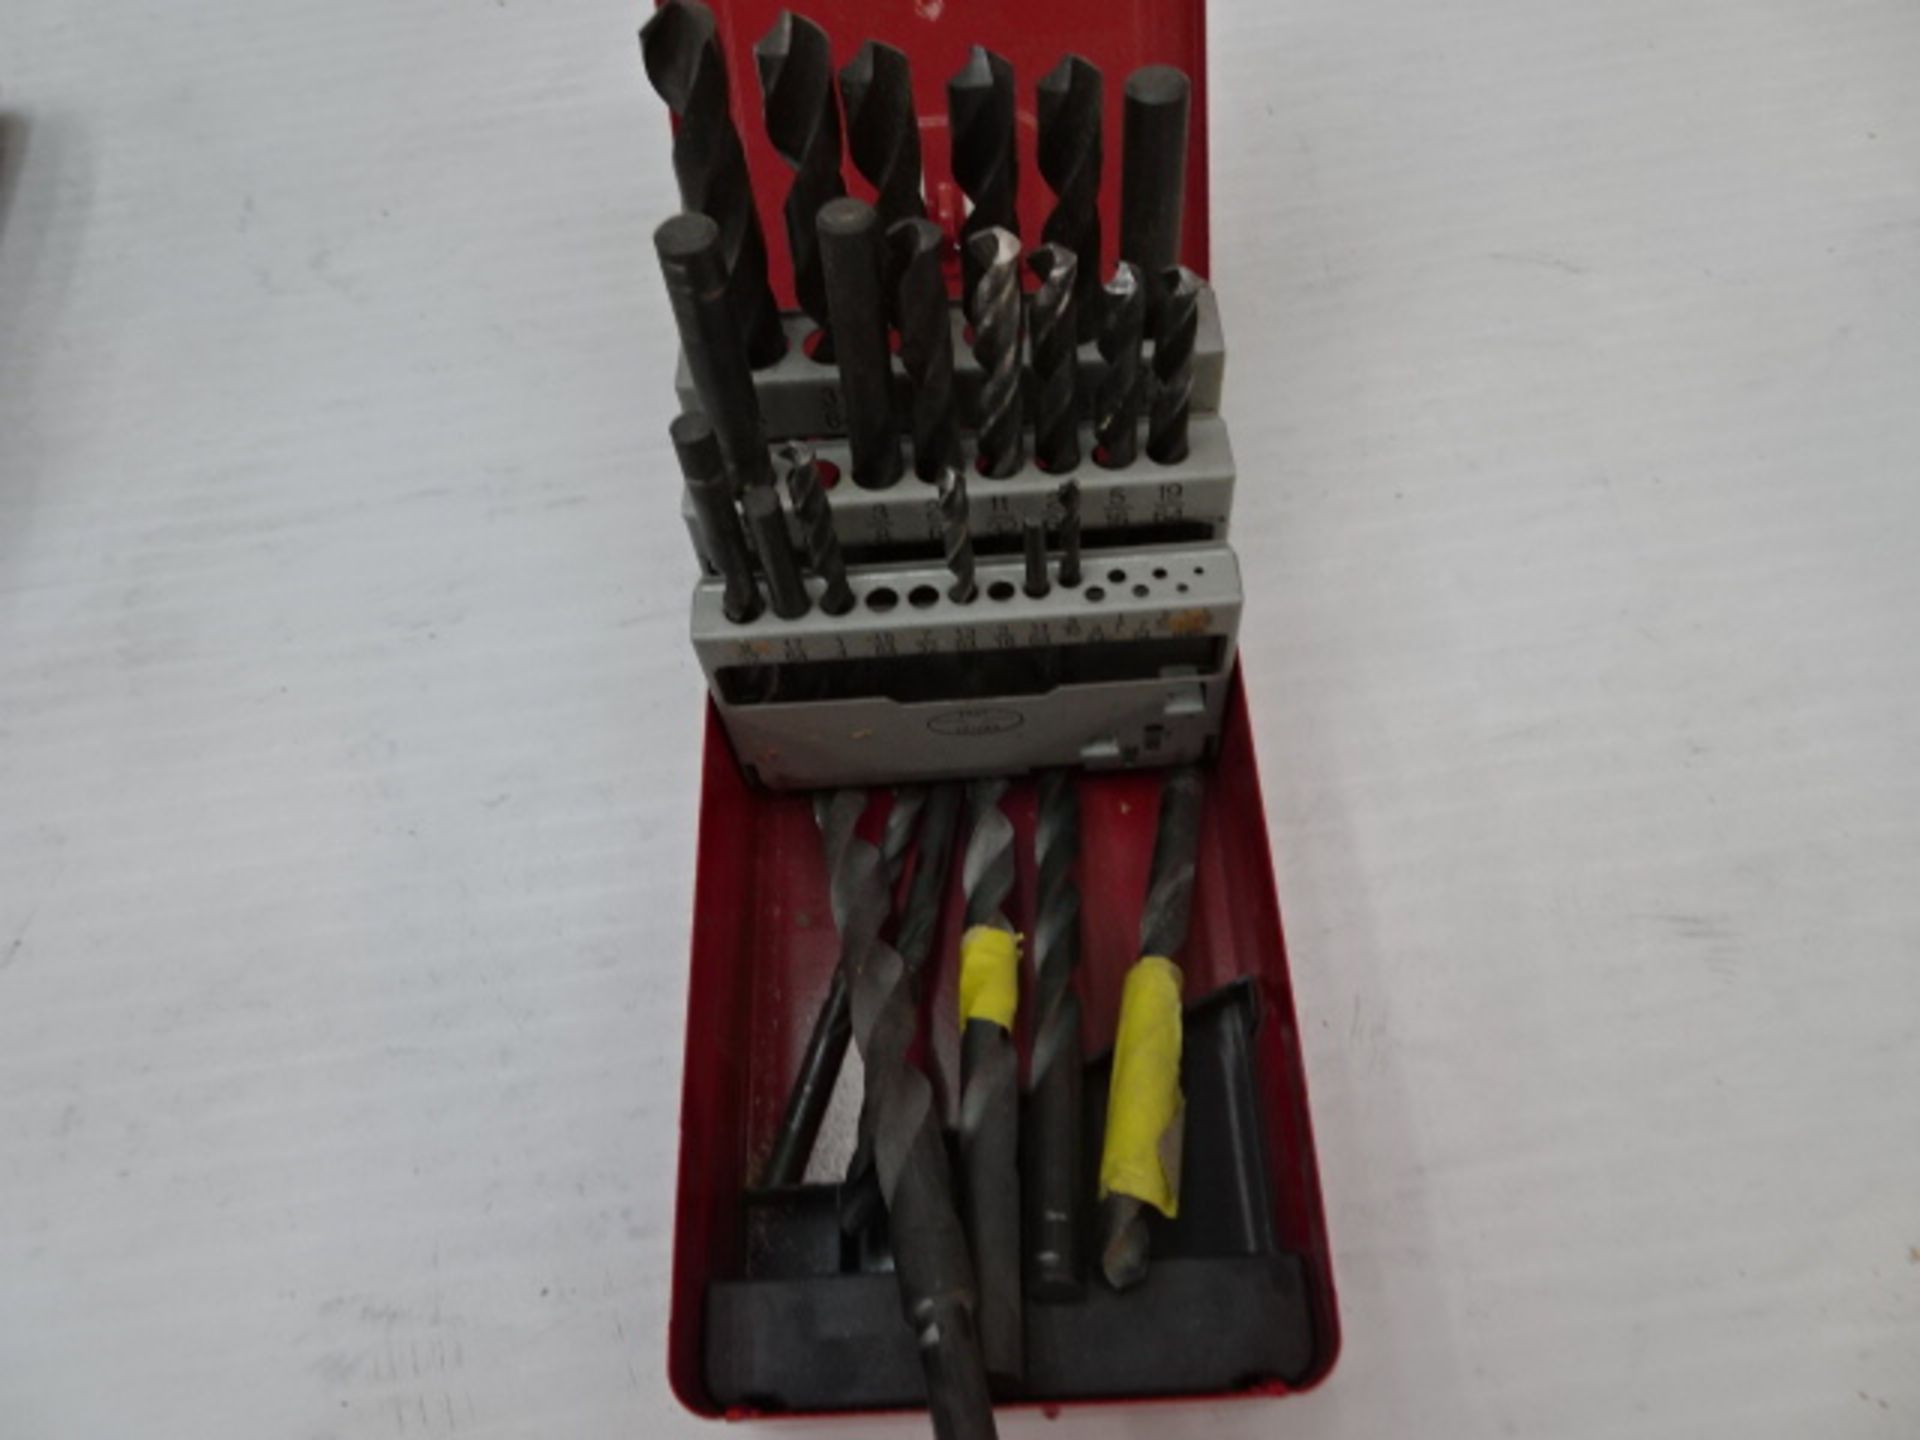 Mèches assorties / Assorted drill bits - Image 4 of 5